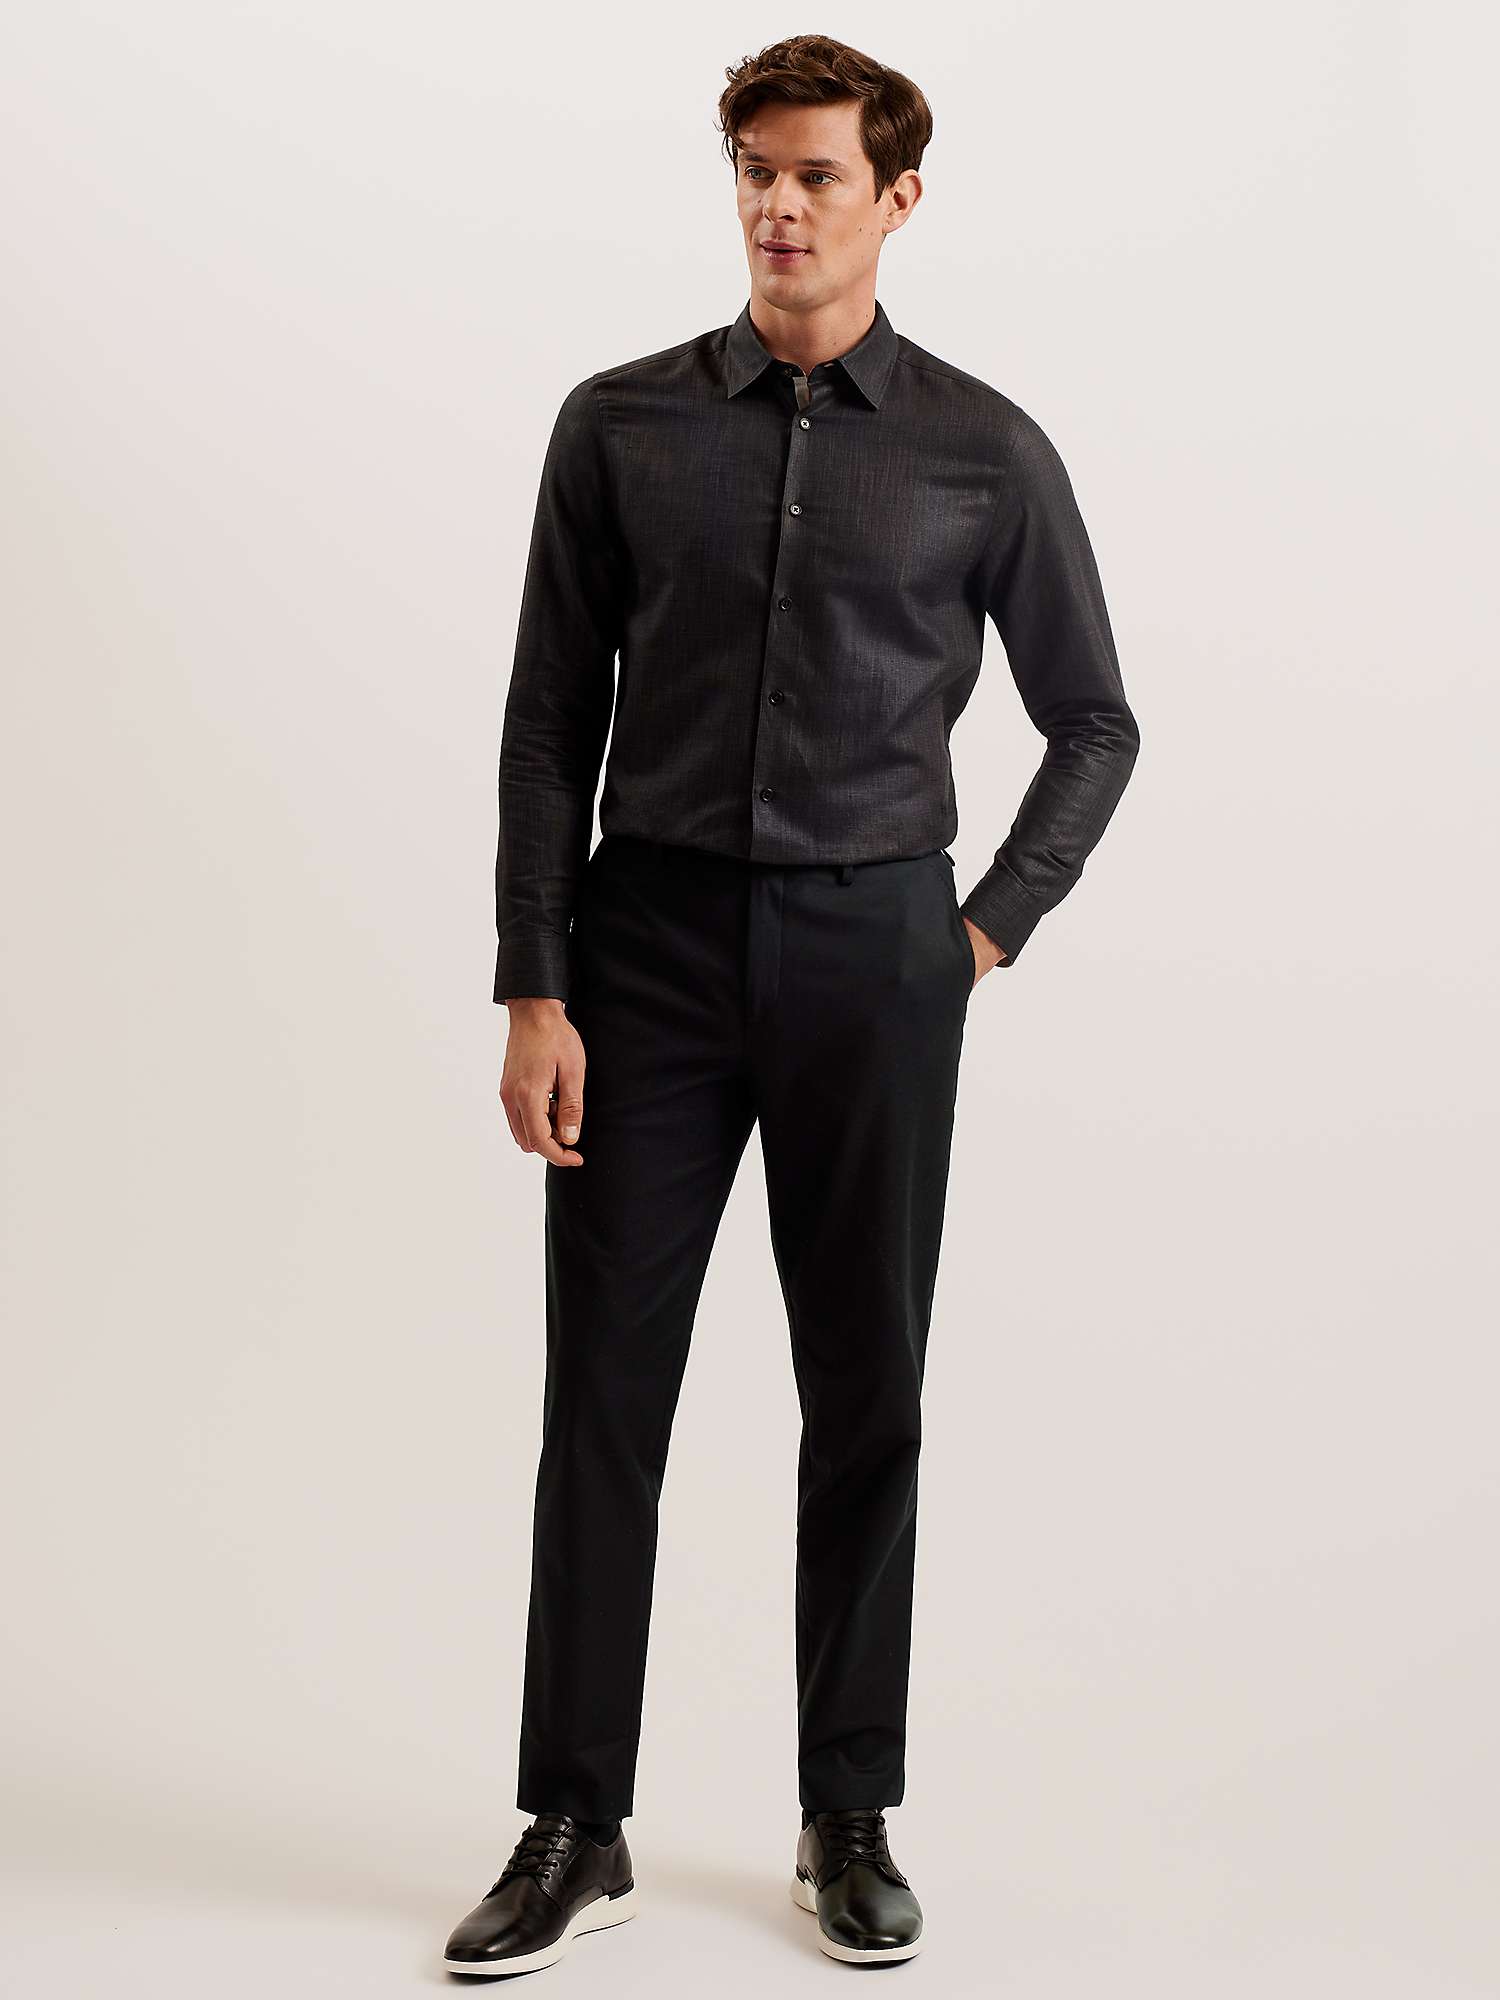 Buy Ted Baker Felixt Slim Fit Cotton Tailored Trousers, Black Online at johnlewis.com